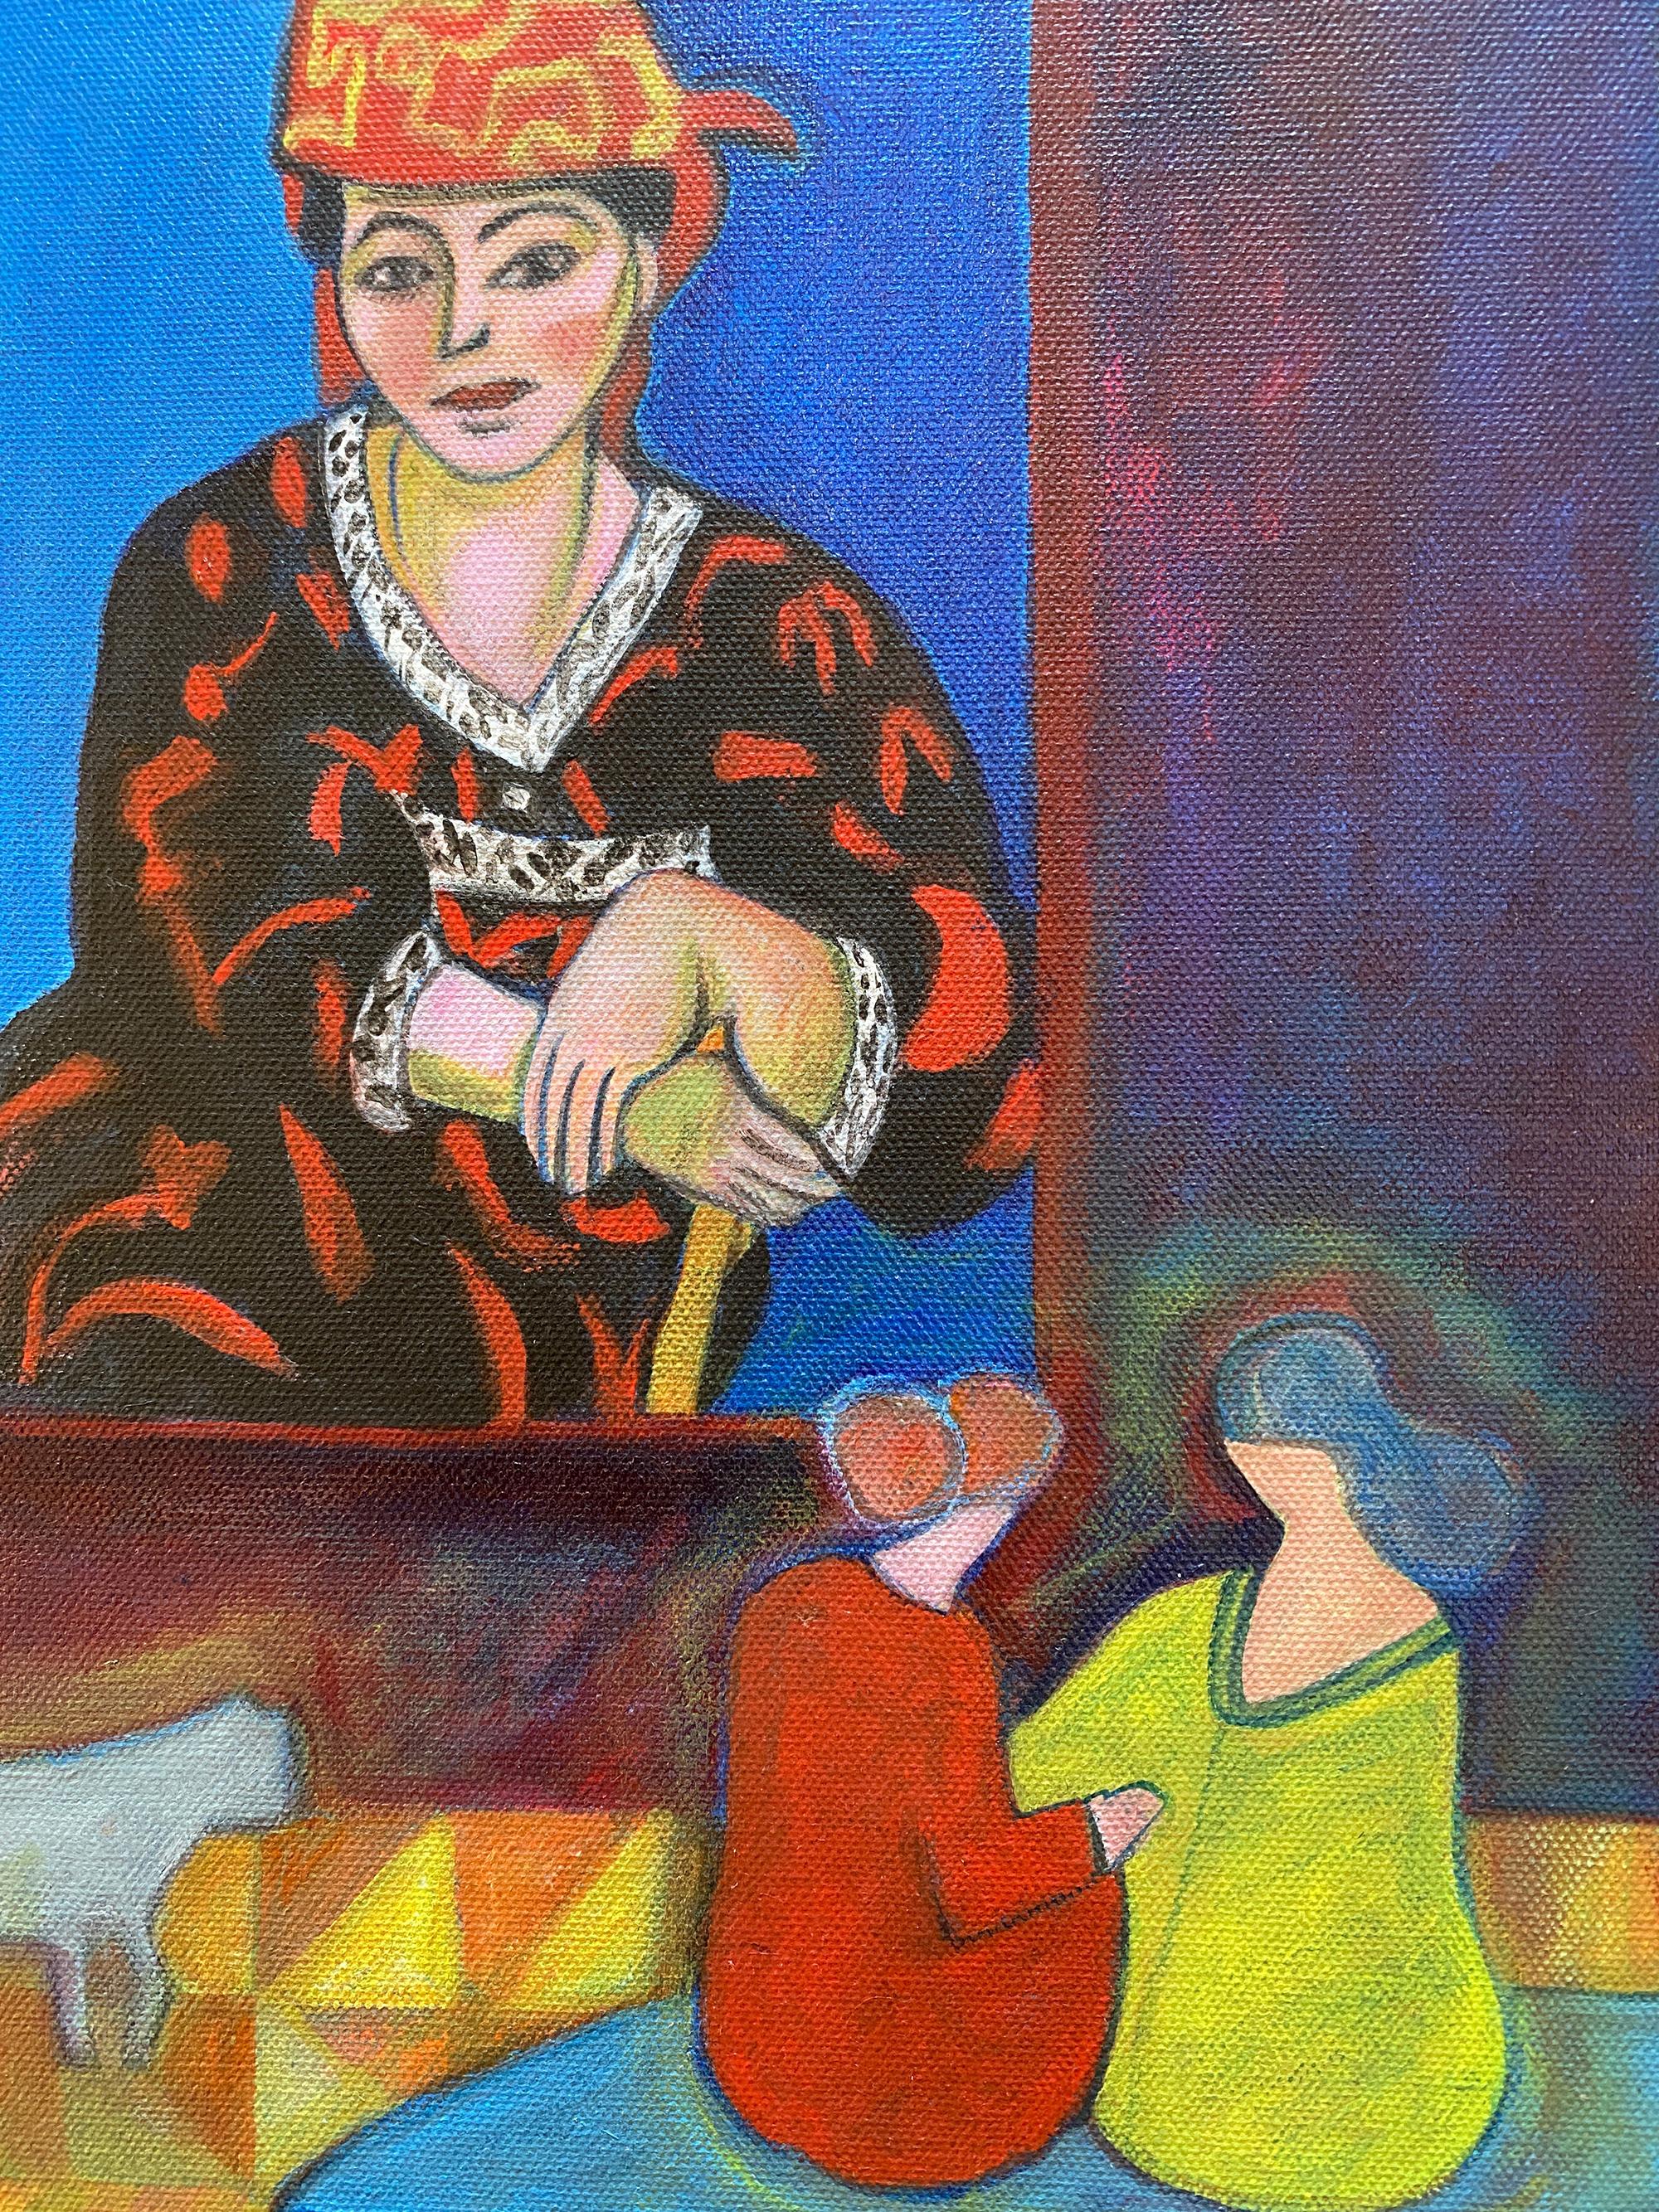 From the 'Museum Musings' series.

This is a brightly colored joyful painting, with blues, yellows and reds featured predominantly, with three female figures and a cat in the foreground space of a museum. The figures and museum space are flattened